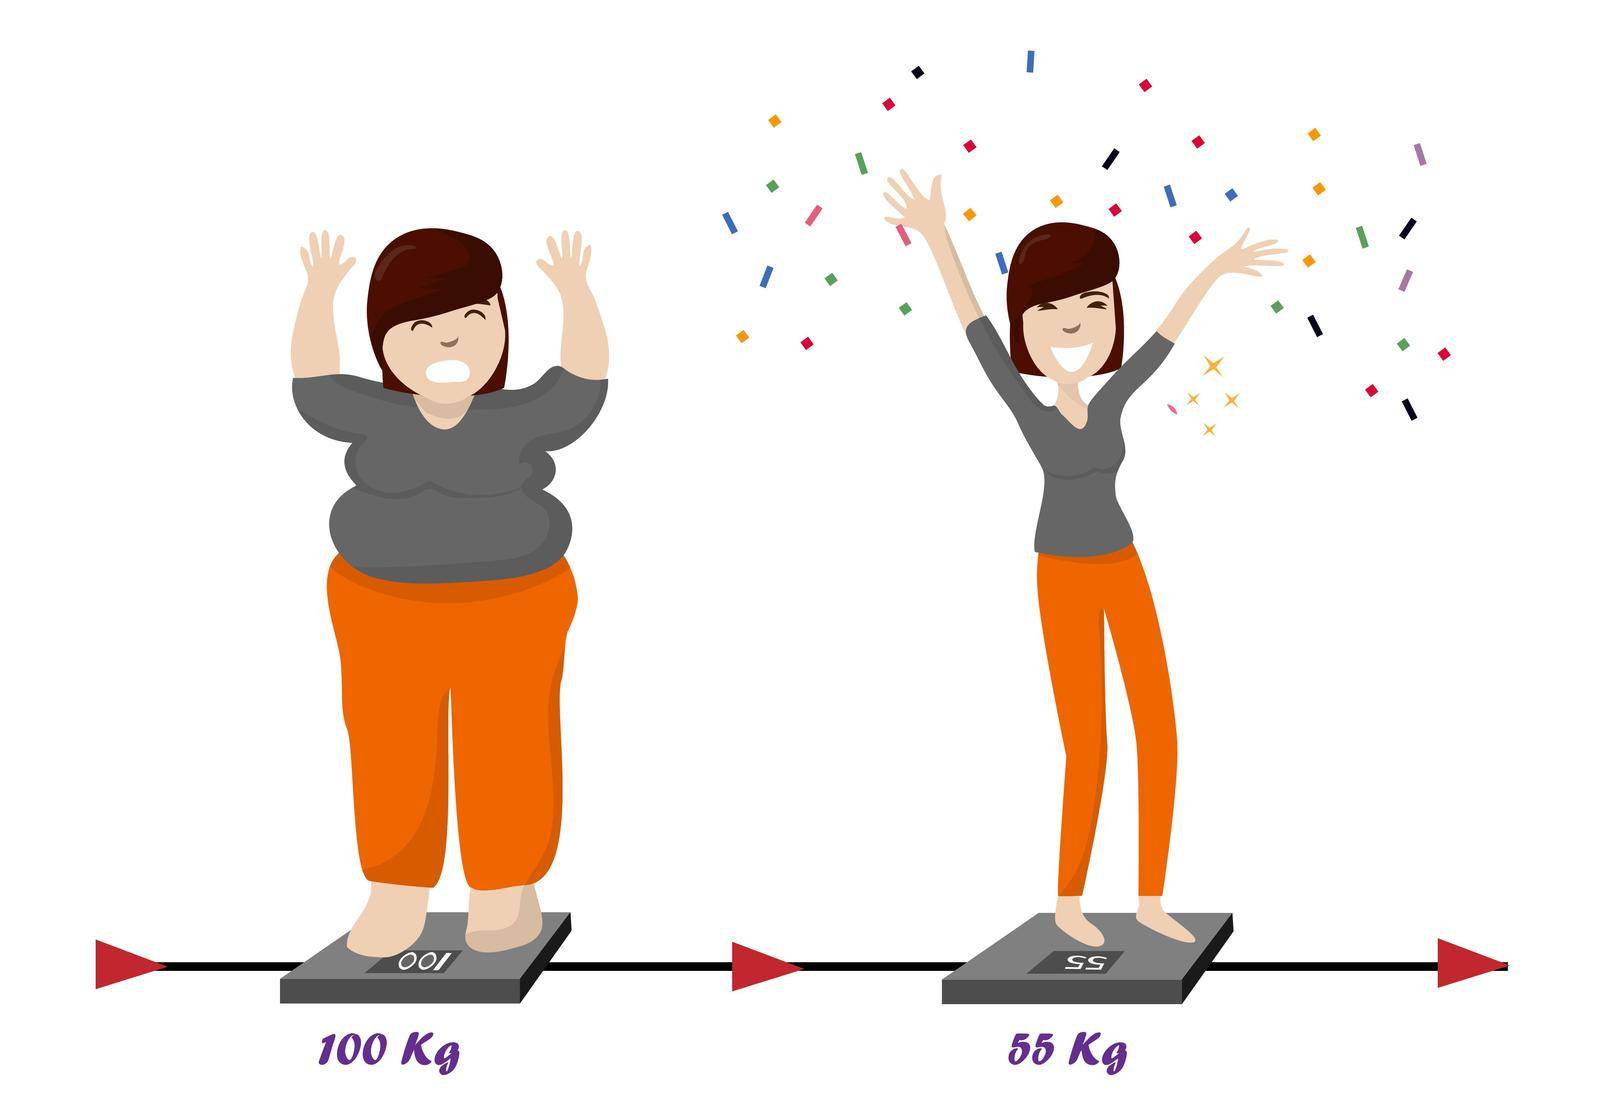 Fat woman weighs a lot, she is sad. And a skinny woman, she can be happy about losing weight. Weight loss ideas Vector illustration by chanwitya28